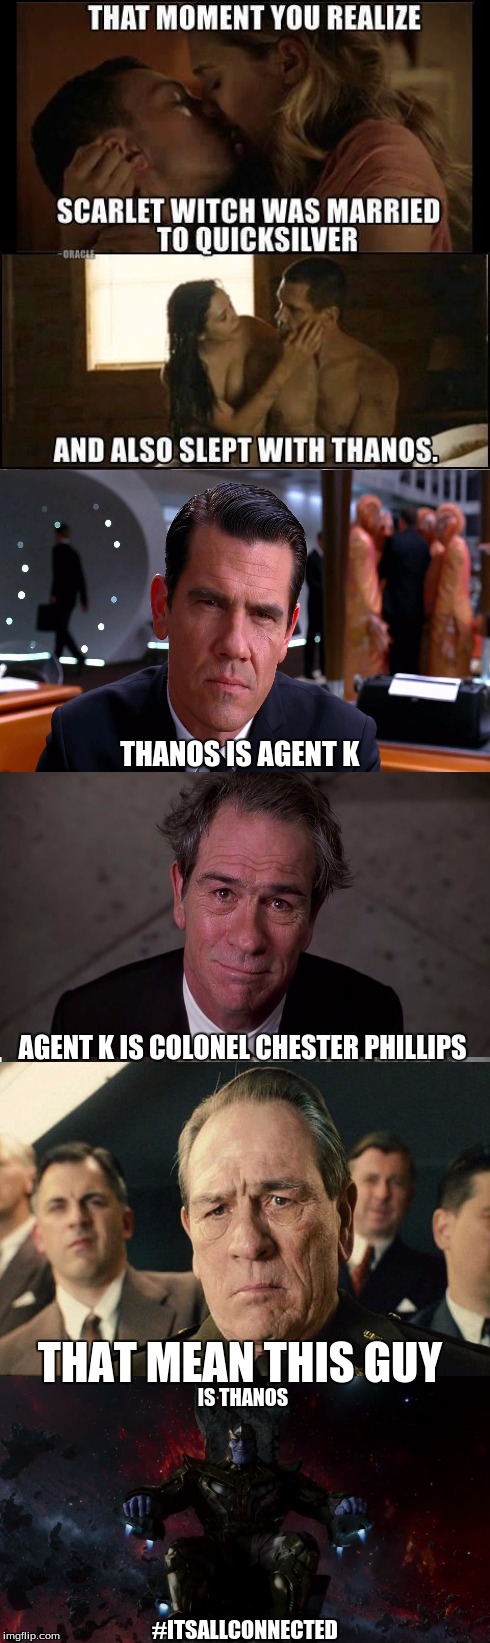 #ITSALLCONNECTED | THANOS IS AGENT K AGENT K IS COLONEL CHESTER PHILLIPS THAT MEAN THIS GUY IS THANOS #ITSALLCONNECTED | image tagged in memes,its all connected,marvel,thanos,agent k,connection | made w/ Imgflip meme maker